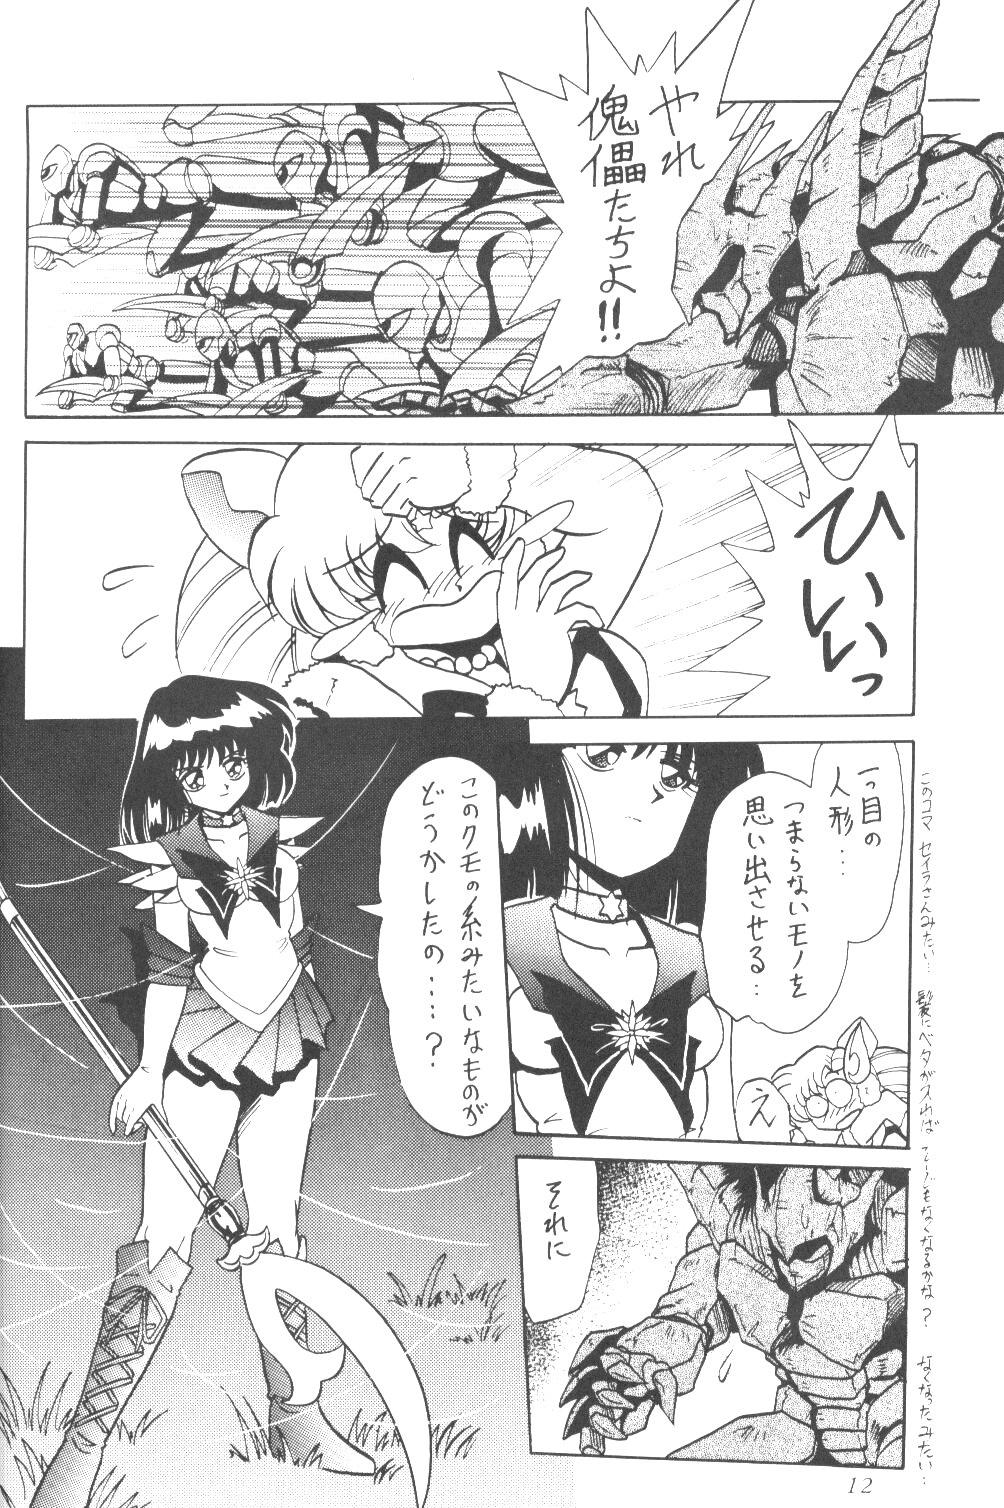 Pain Silent Saturn SS vol. 3 - Sailor moon Con - Page 11